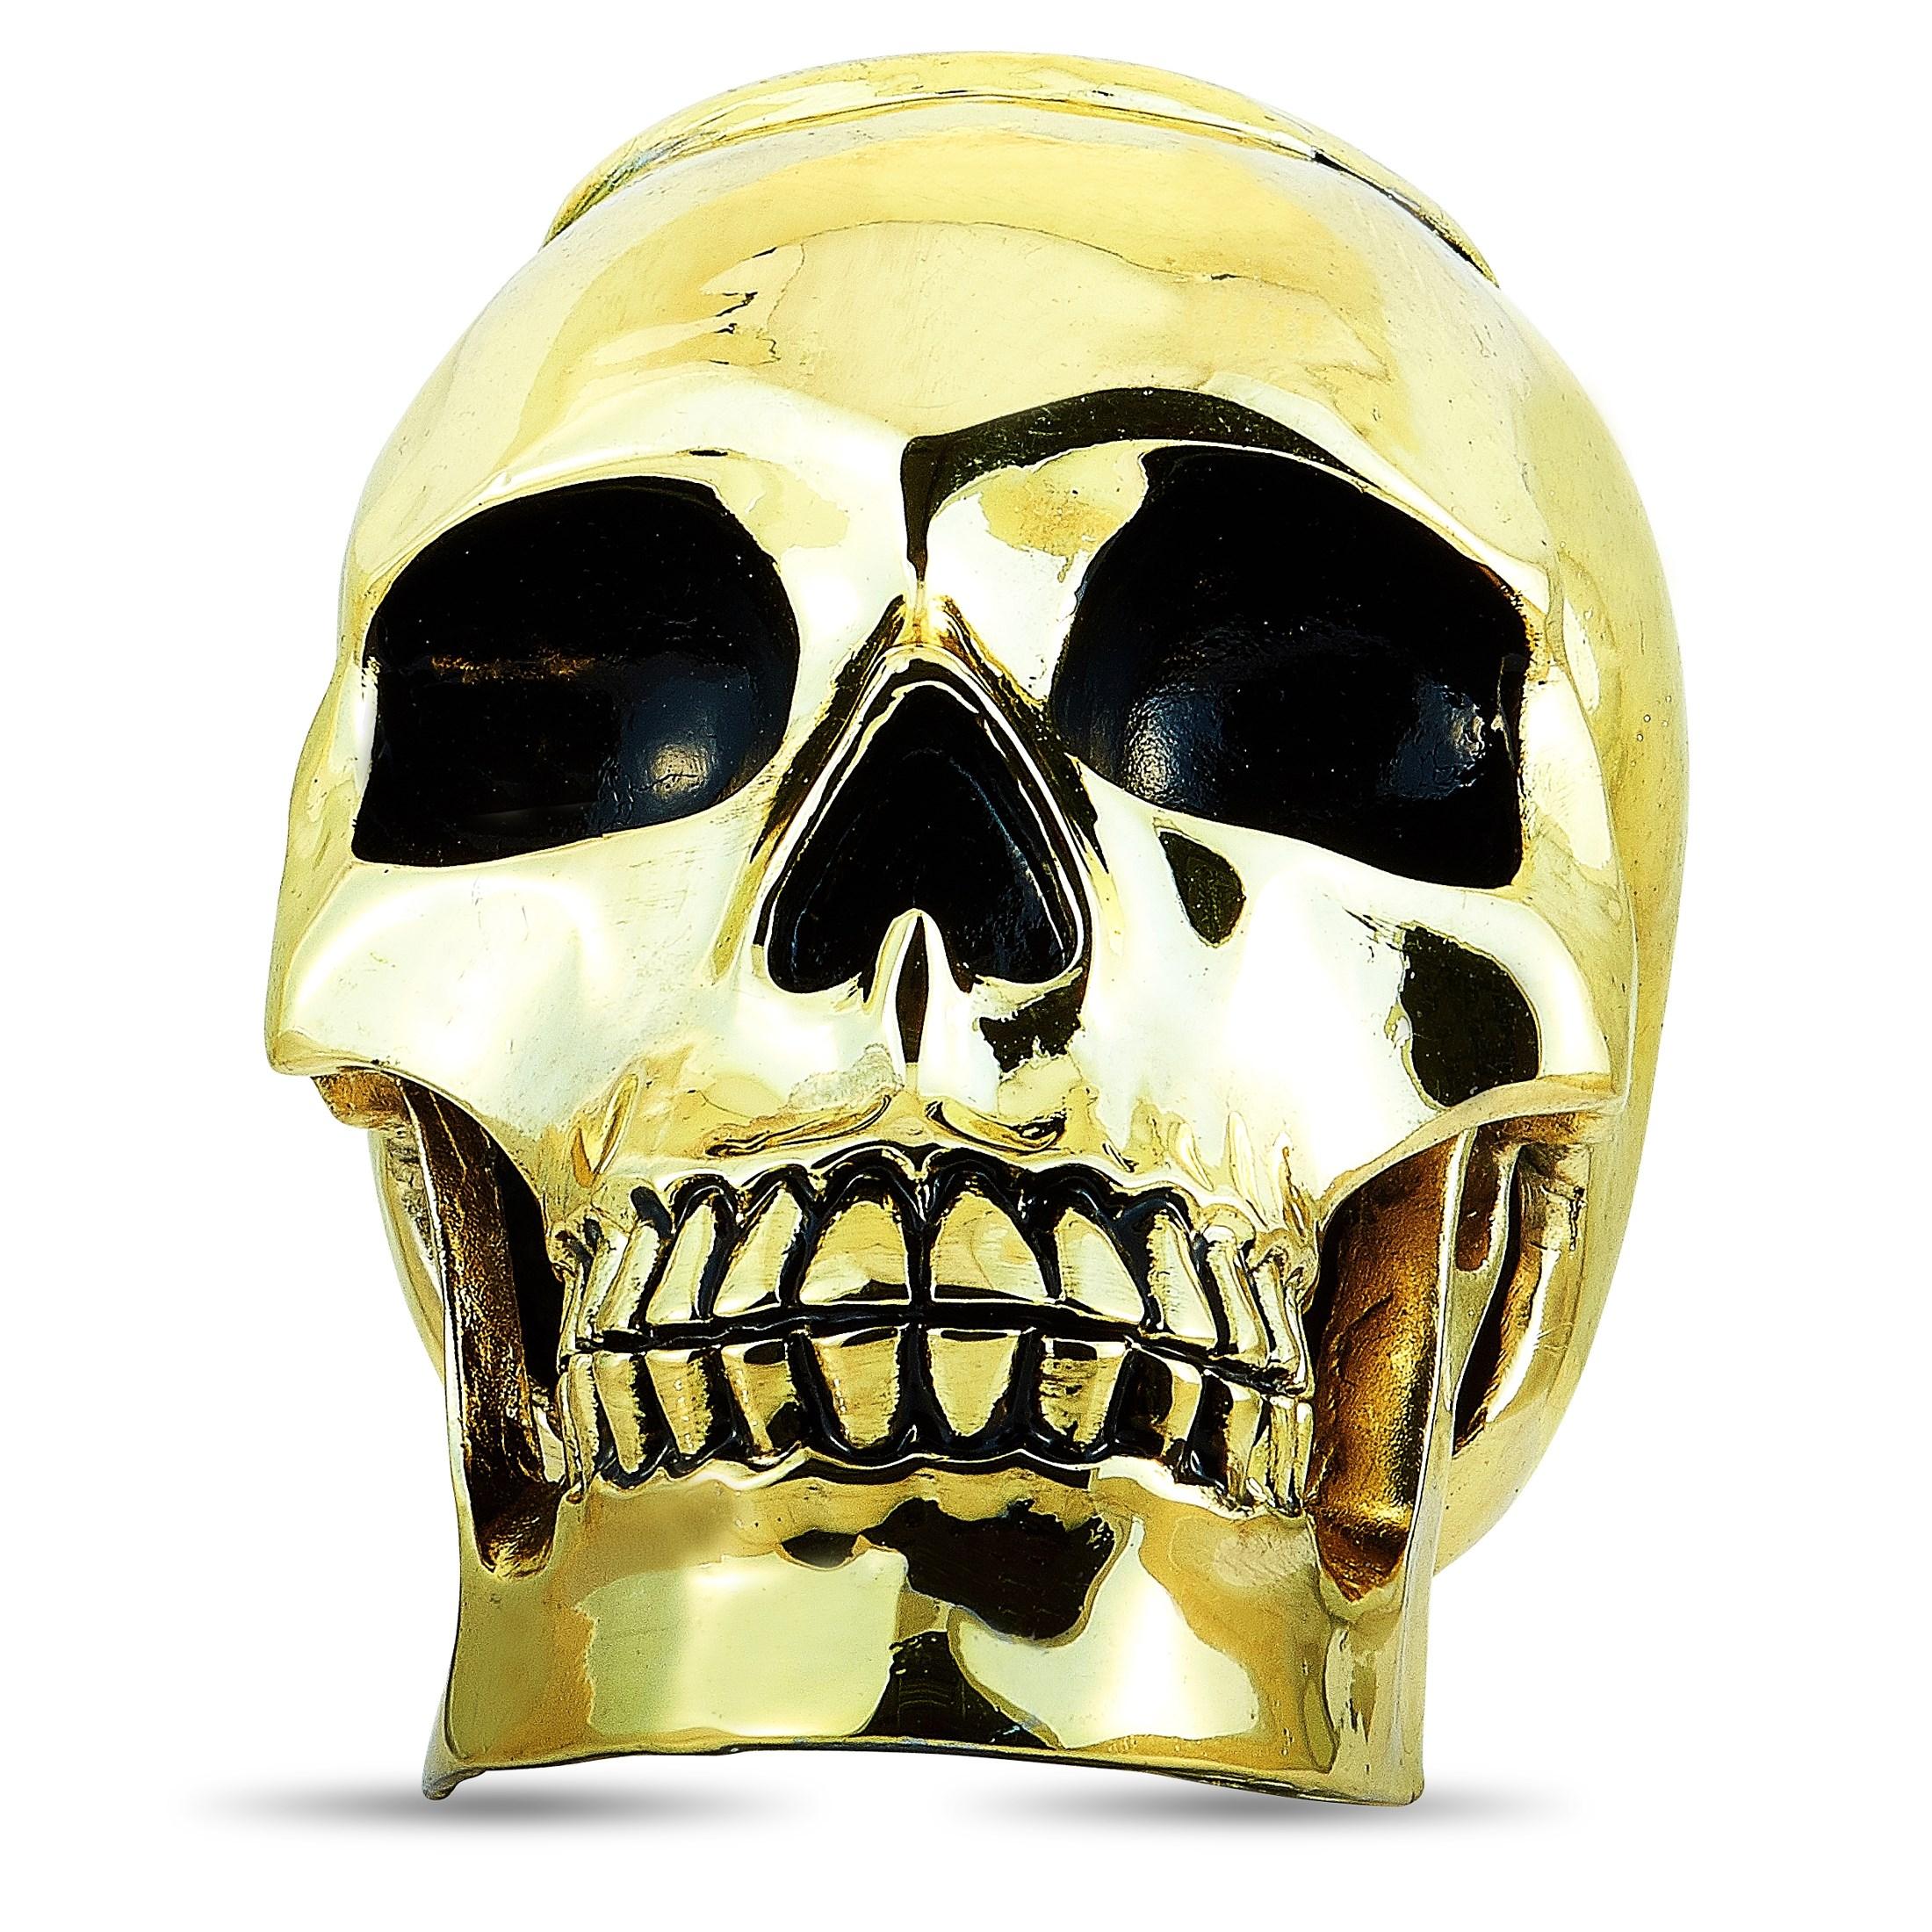 The King Baby “Skull” candle holder is made of brass alloy and weighs 489.5 grams, measuring 4” in length and 2.50” in width.

The candle holder is offered in brand-new condition and includes the manufacturer’s box.